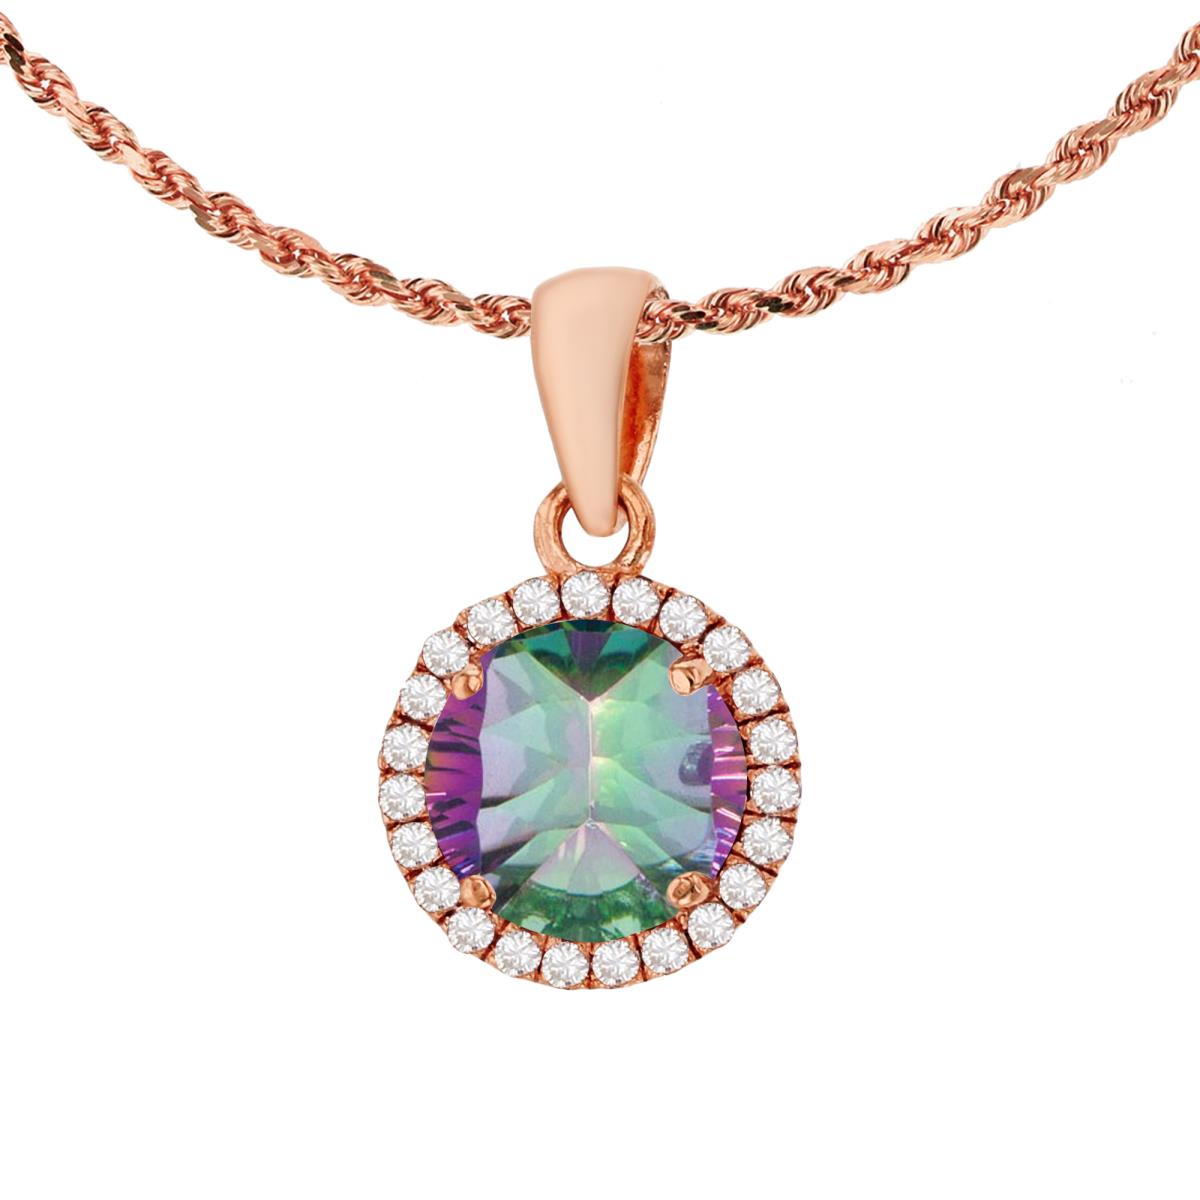 10K Rose Gold 7mm Round Mystic Green Topaz & 0.12 CTTW Diamond Halo 18" Rope Chain Necklace